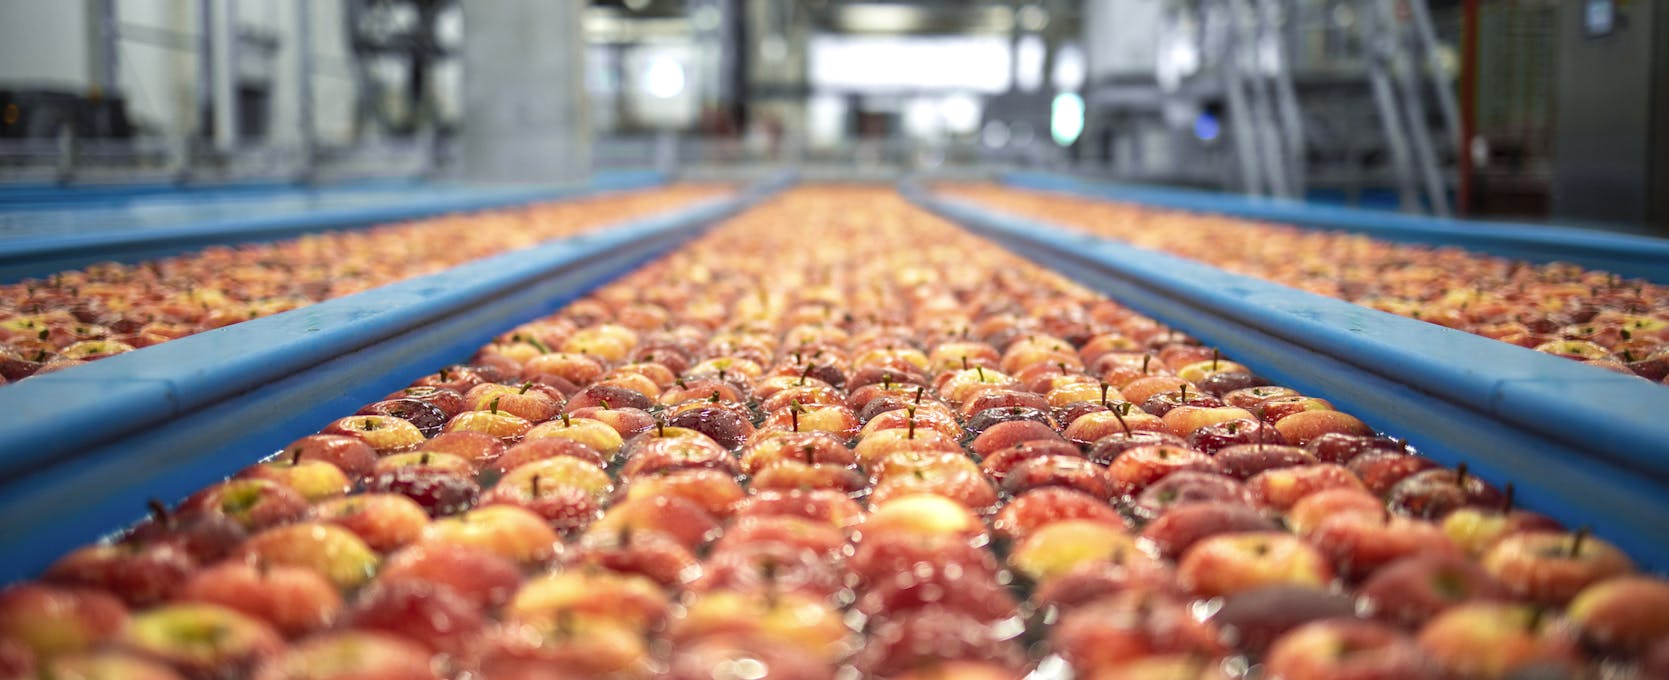 Apples in factory